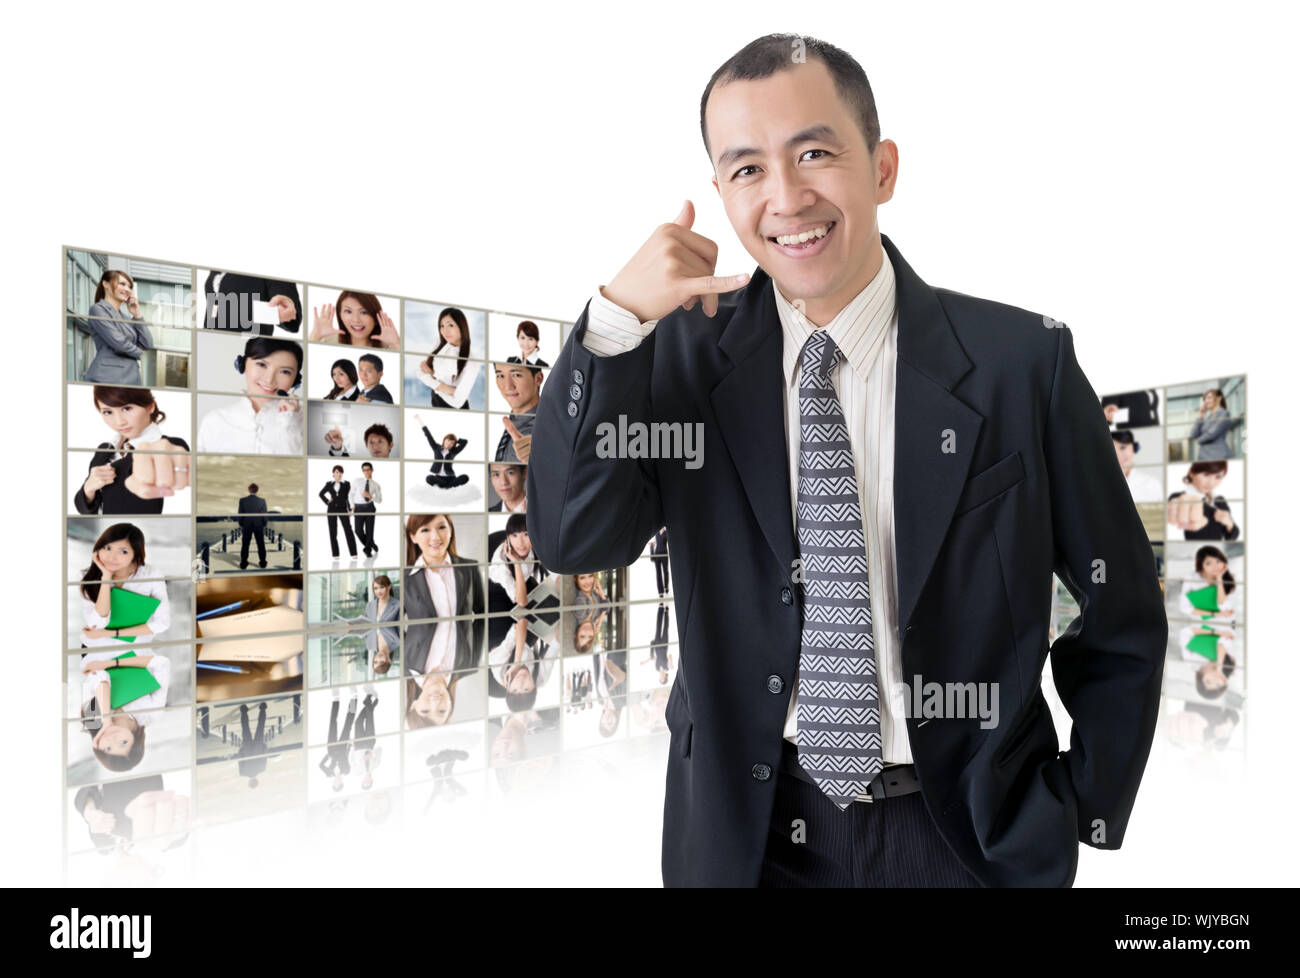 Asian business man or boss standing in front of tV screen wall showing pictures of business concept. Stock Photo